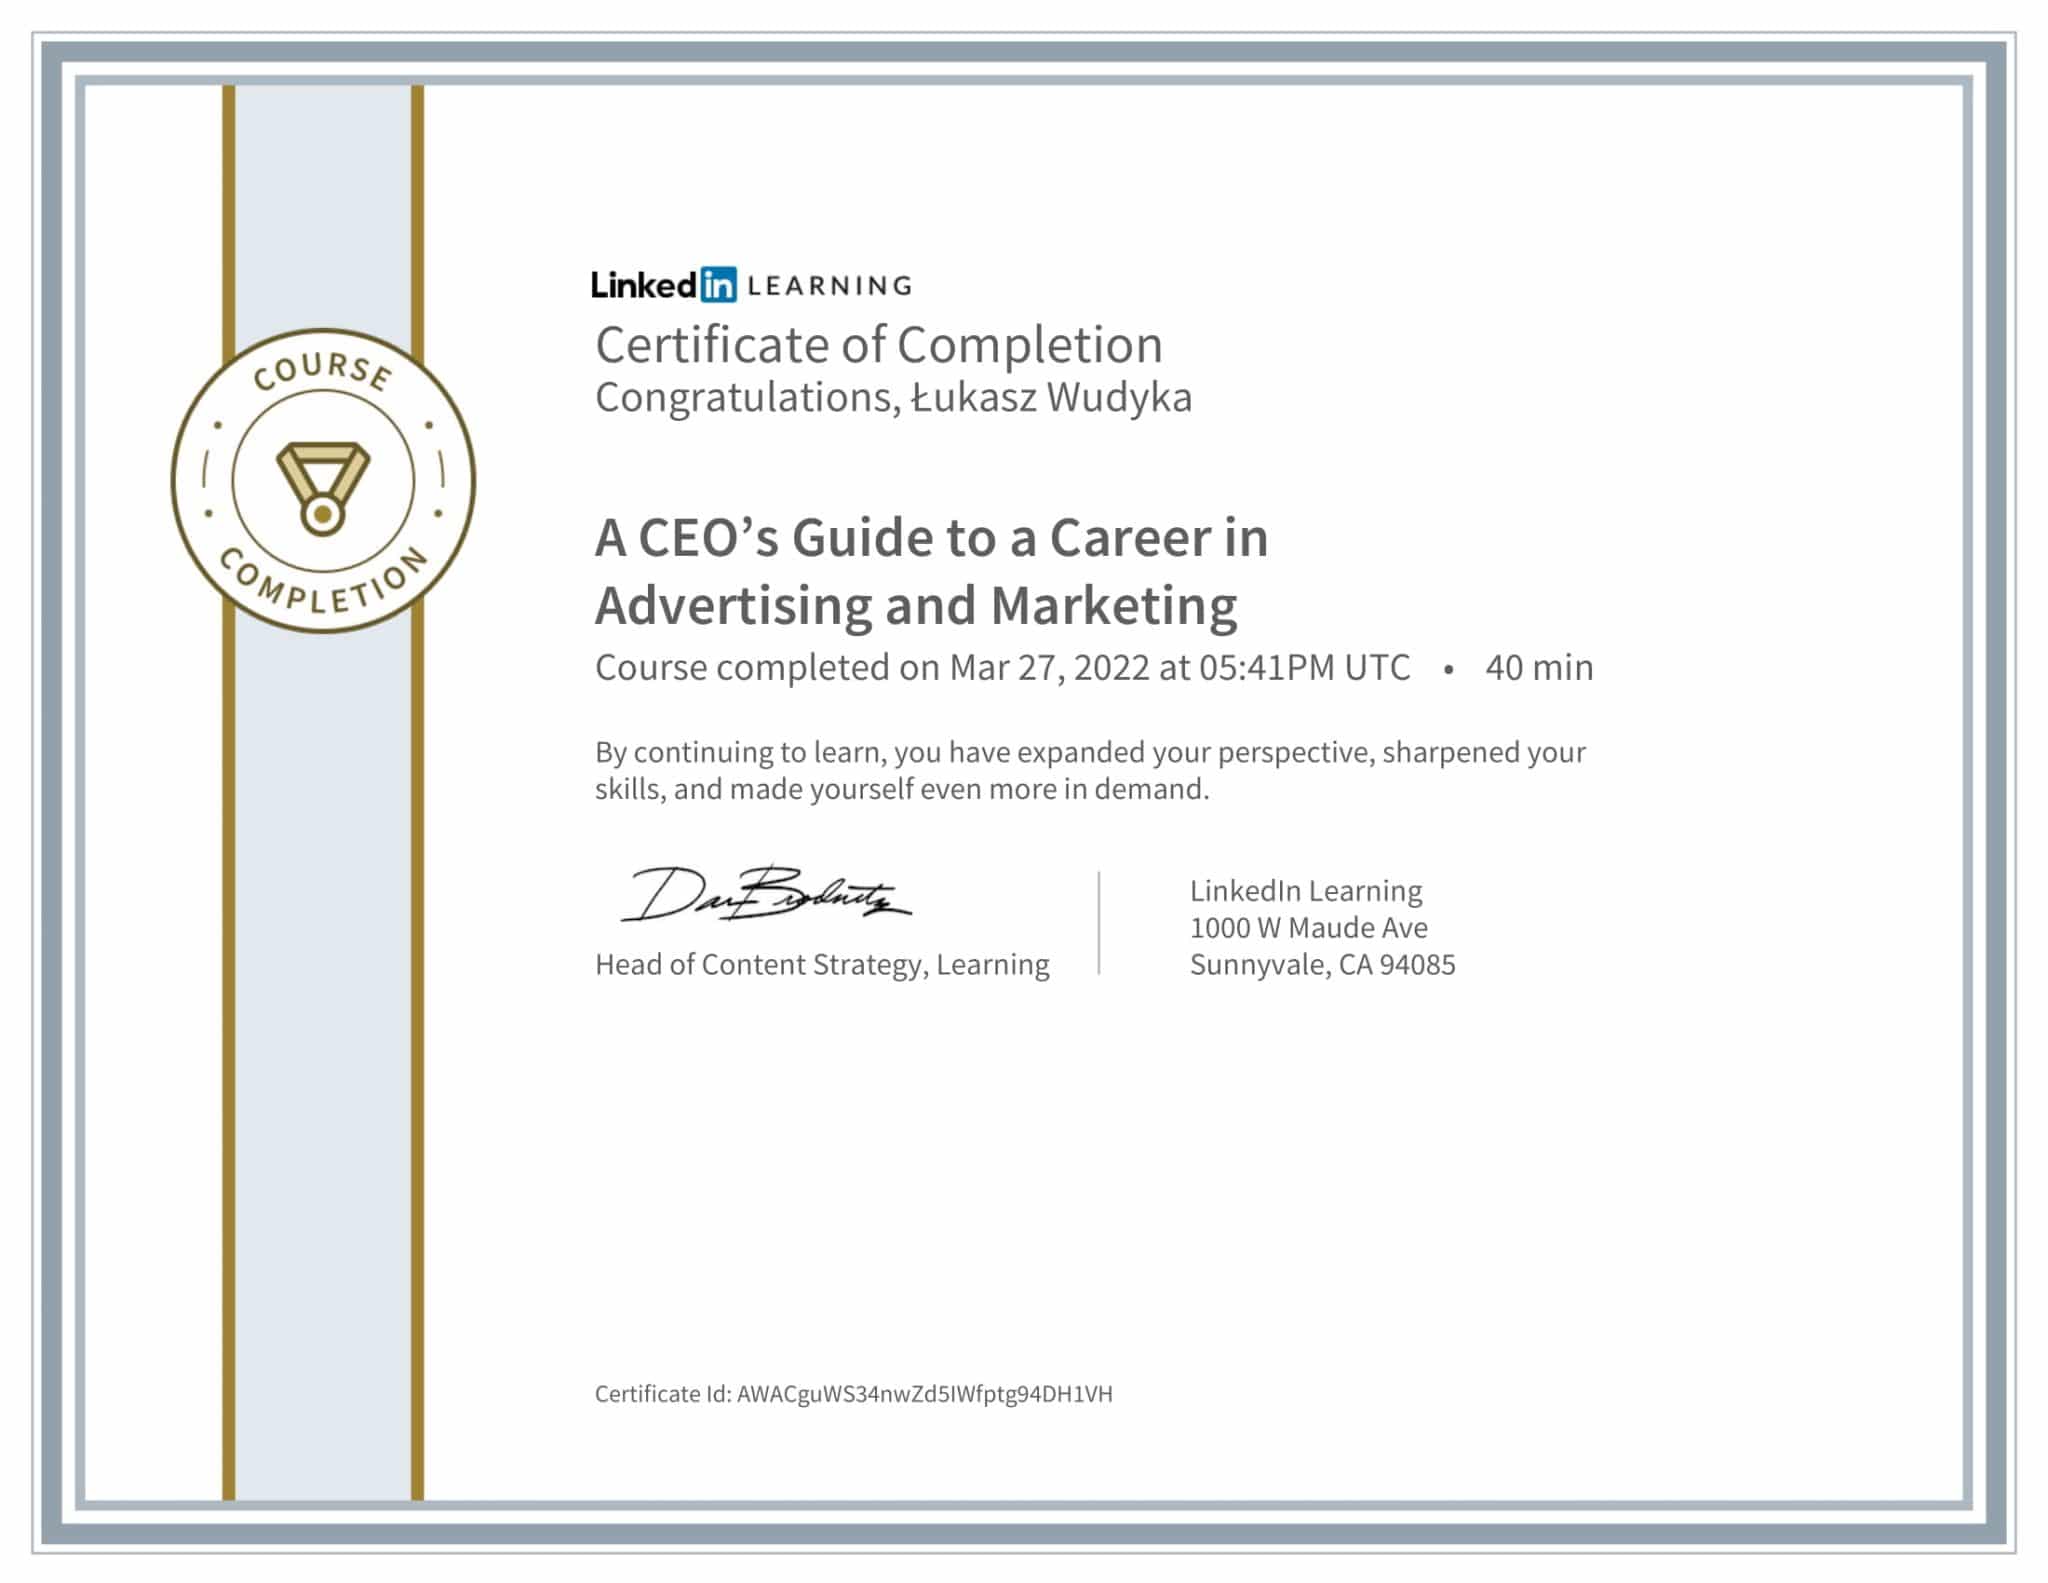 CertificateOfCompletion_A CEOs Guide to a Career in Advertising and Marketing-1